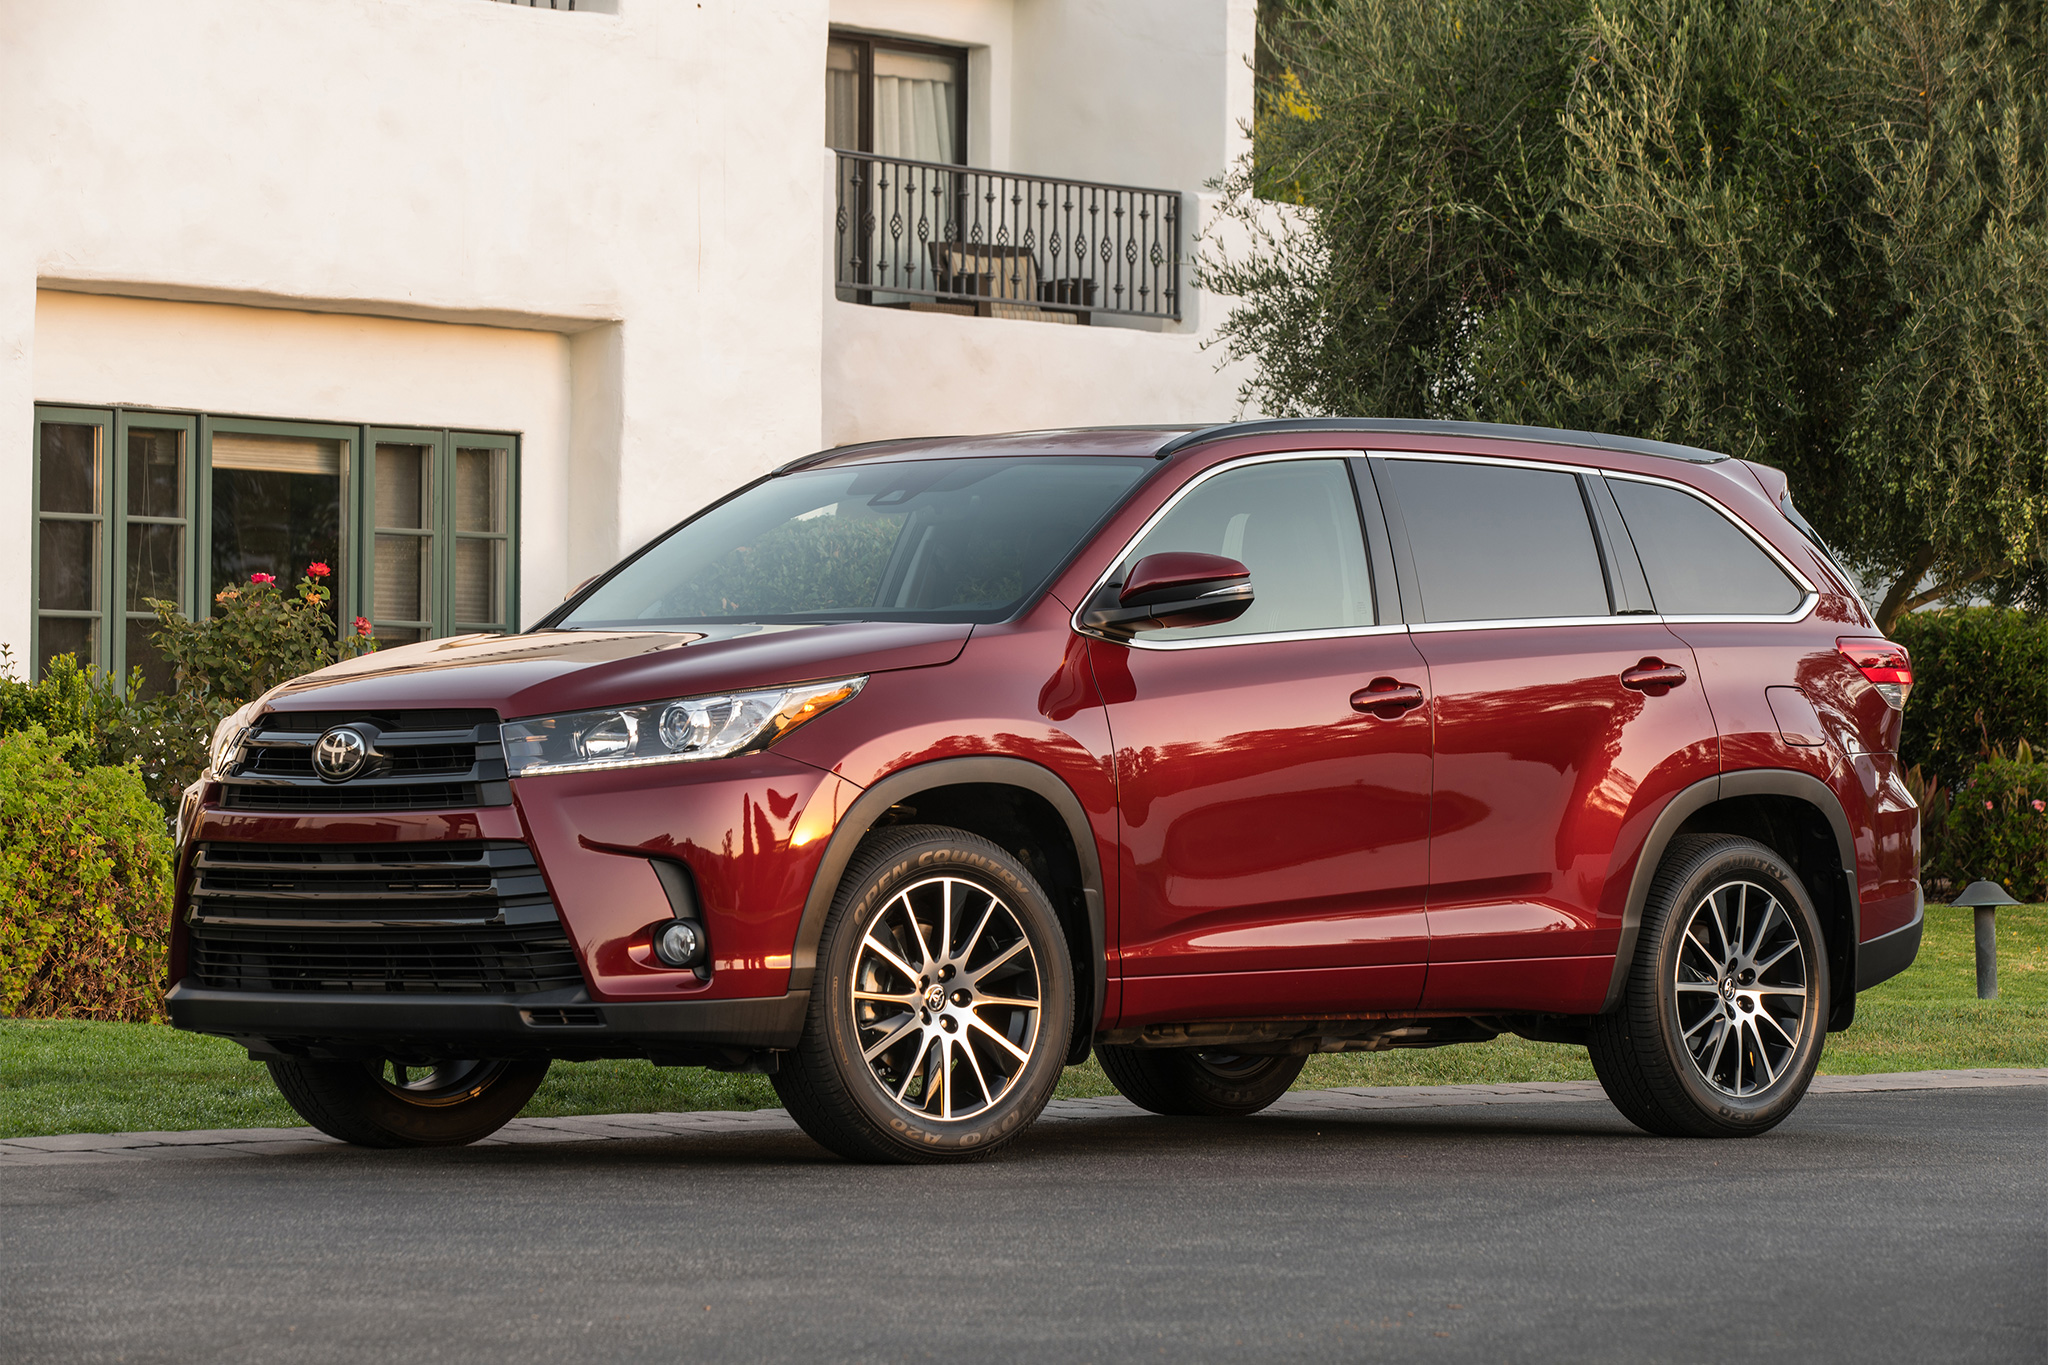 2017 Toyota Highlander Test Drive and Review, Specifications, Fuel